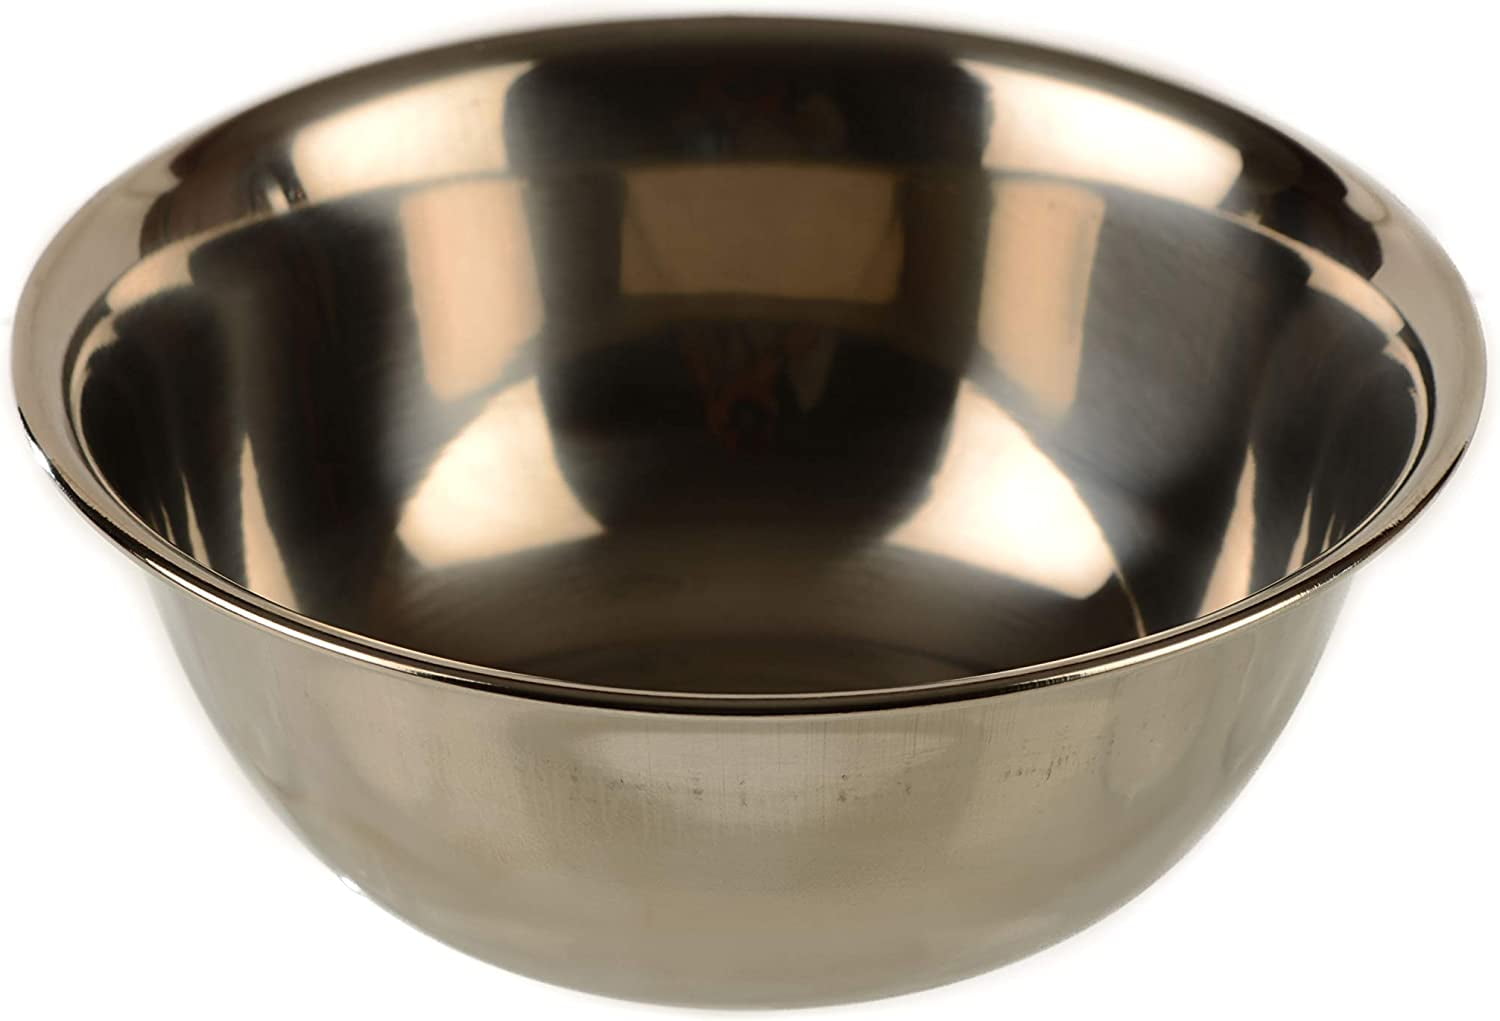 Mcsunley 5 Qt. Stainless Steel Mixing Bowl - Bender Lumber Co.